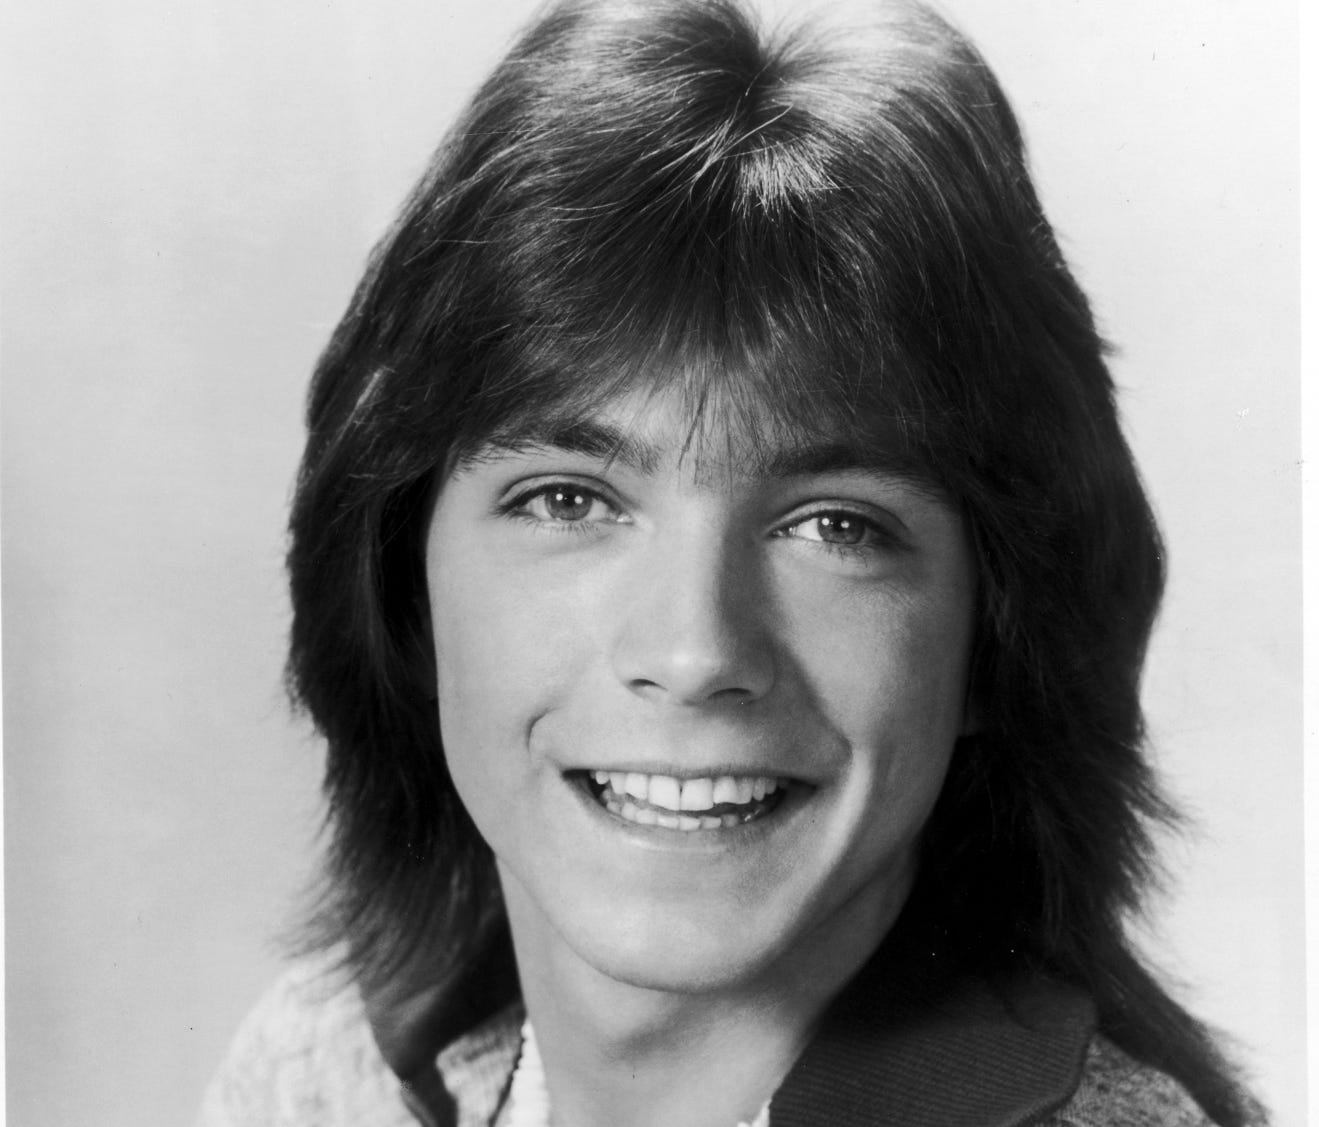 Musical recording artist David Cassidy from 'The Partridge Family.'